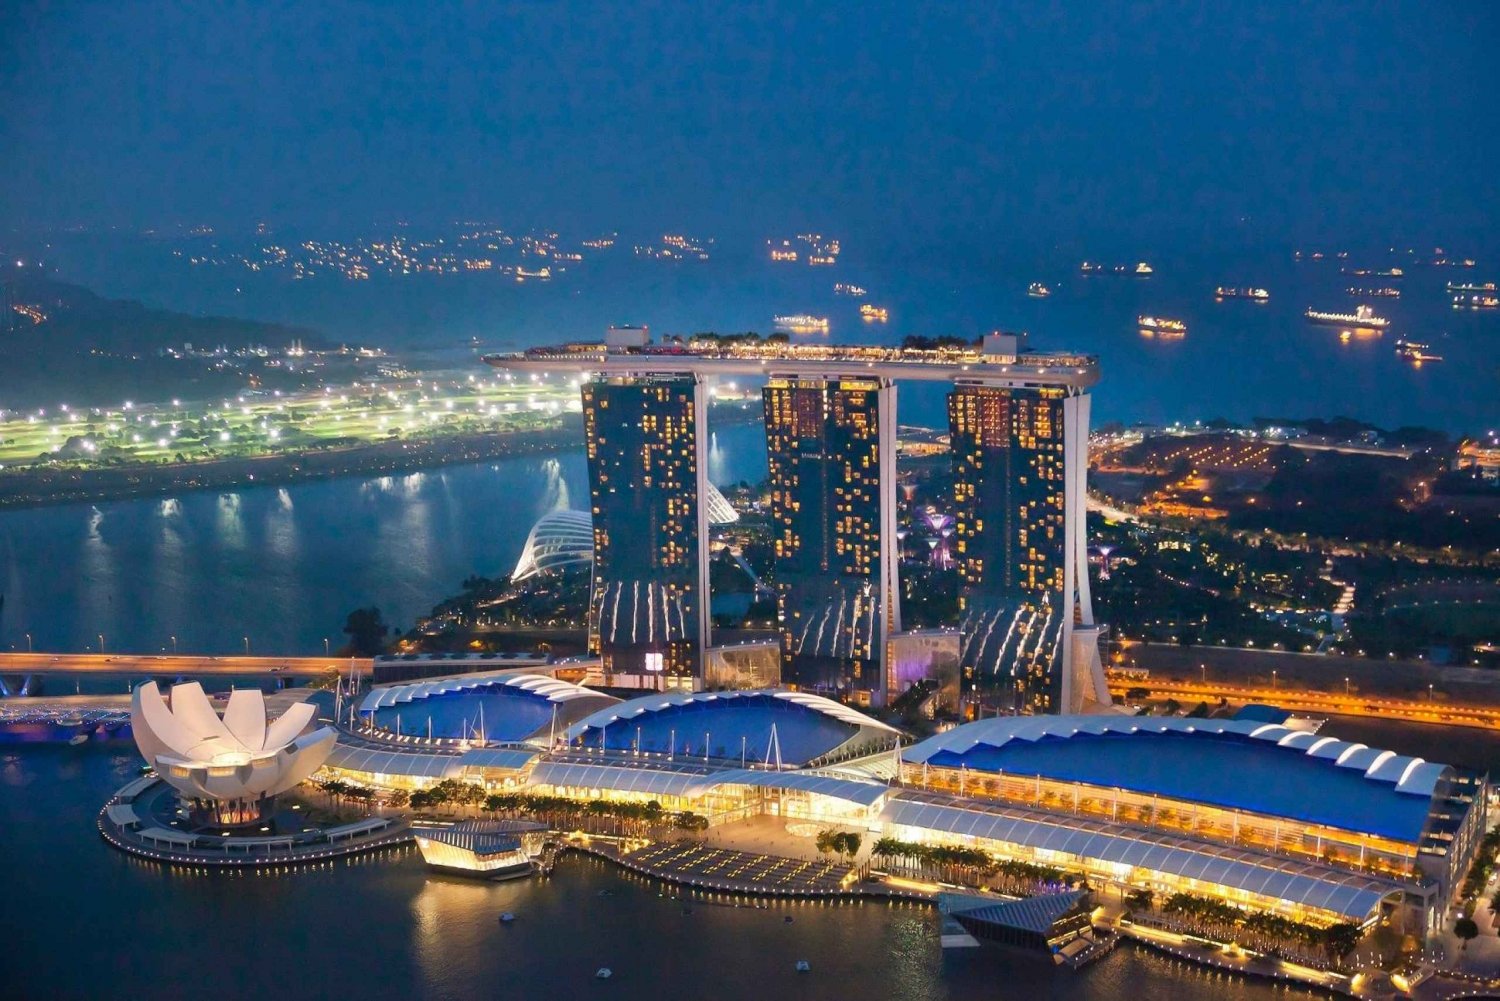 Singapore: Gardens by the Bay & MBS Observation Deck Ticket